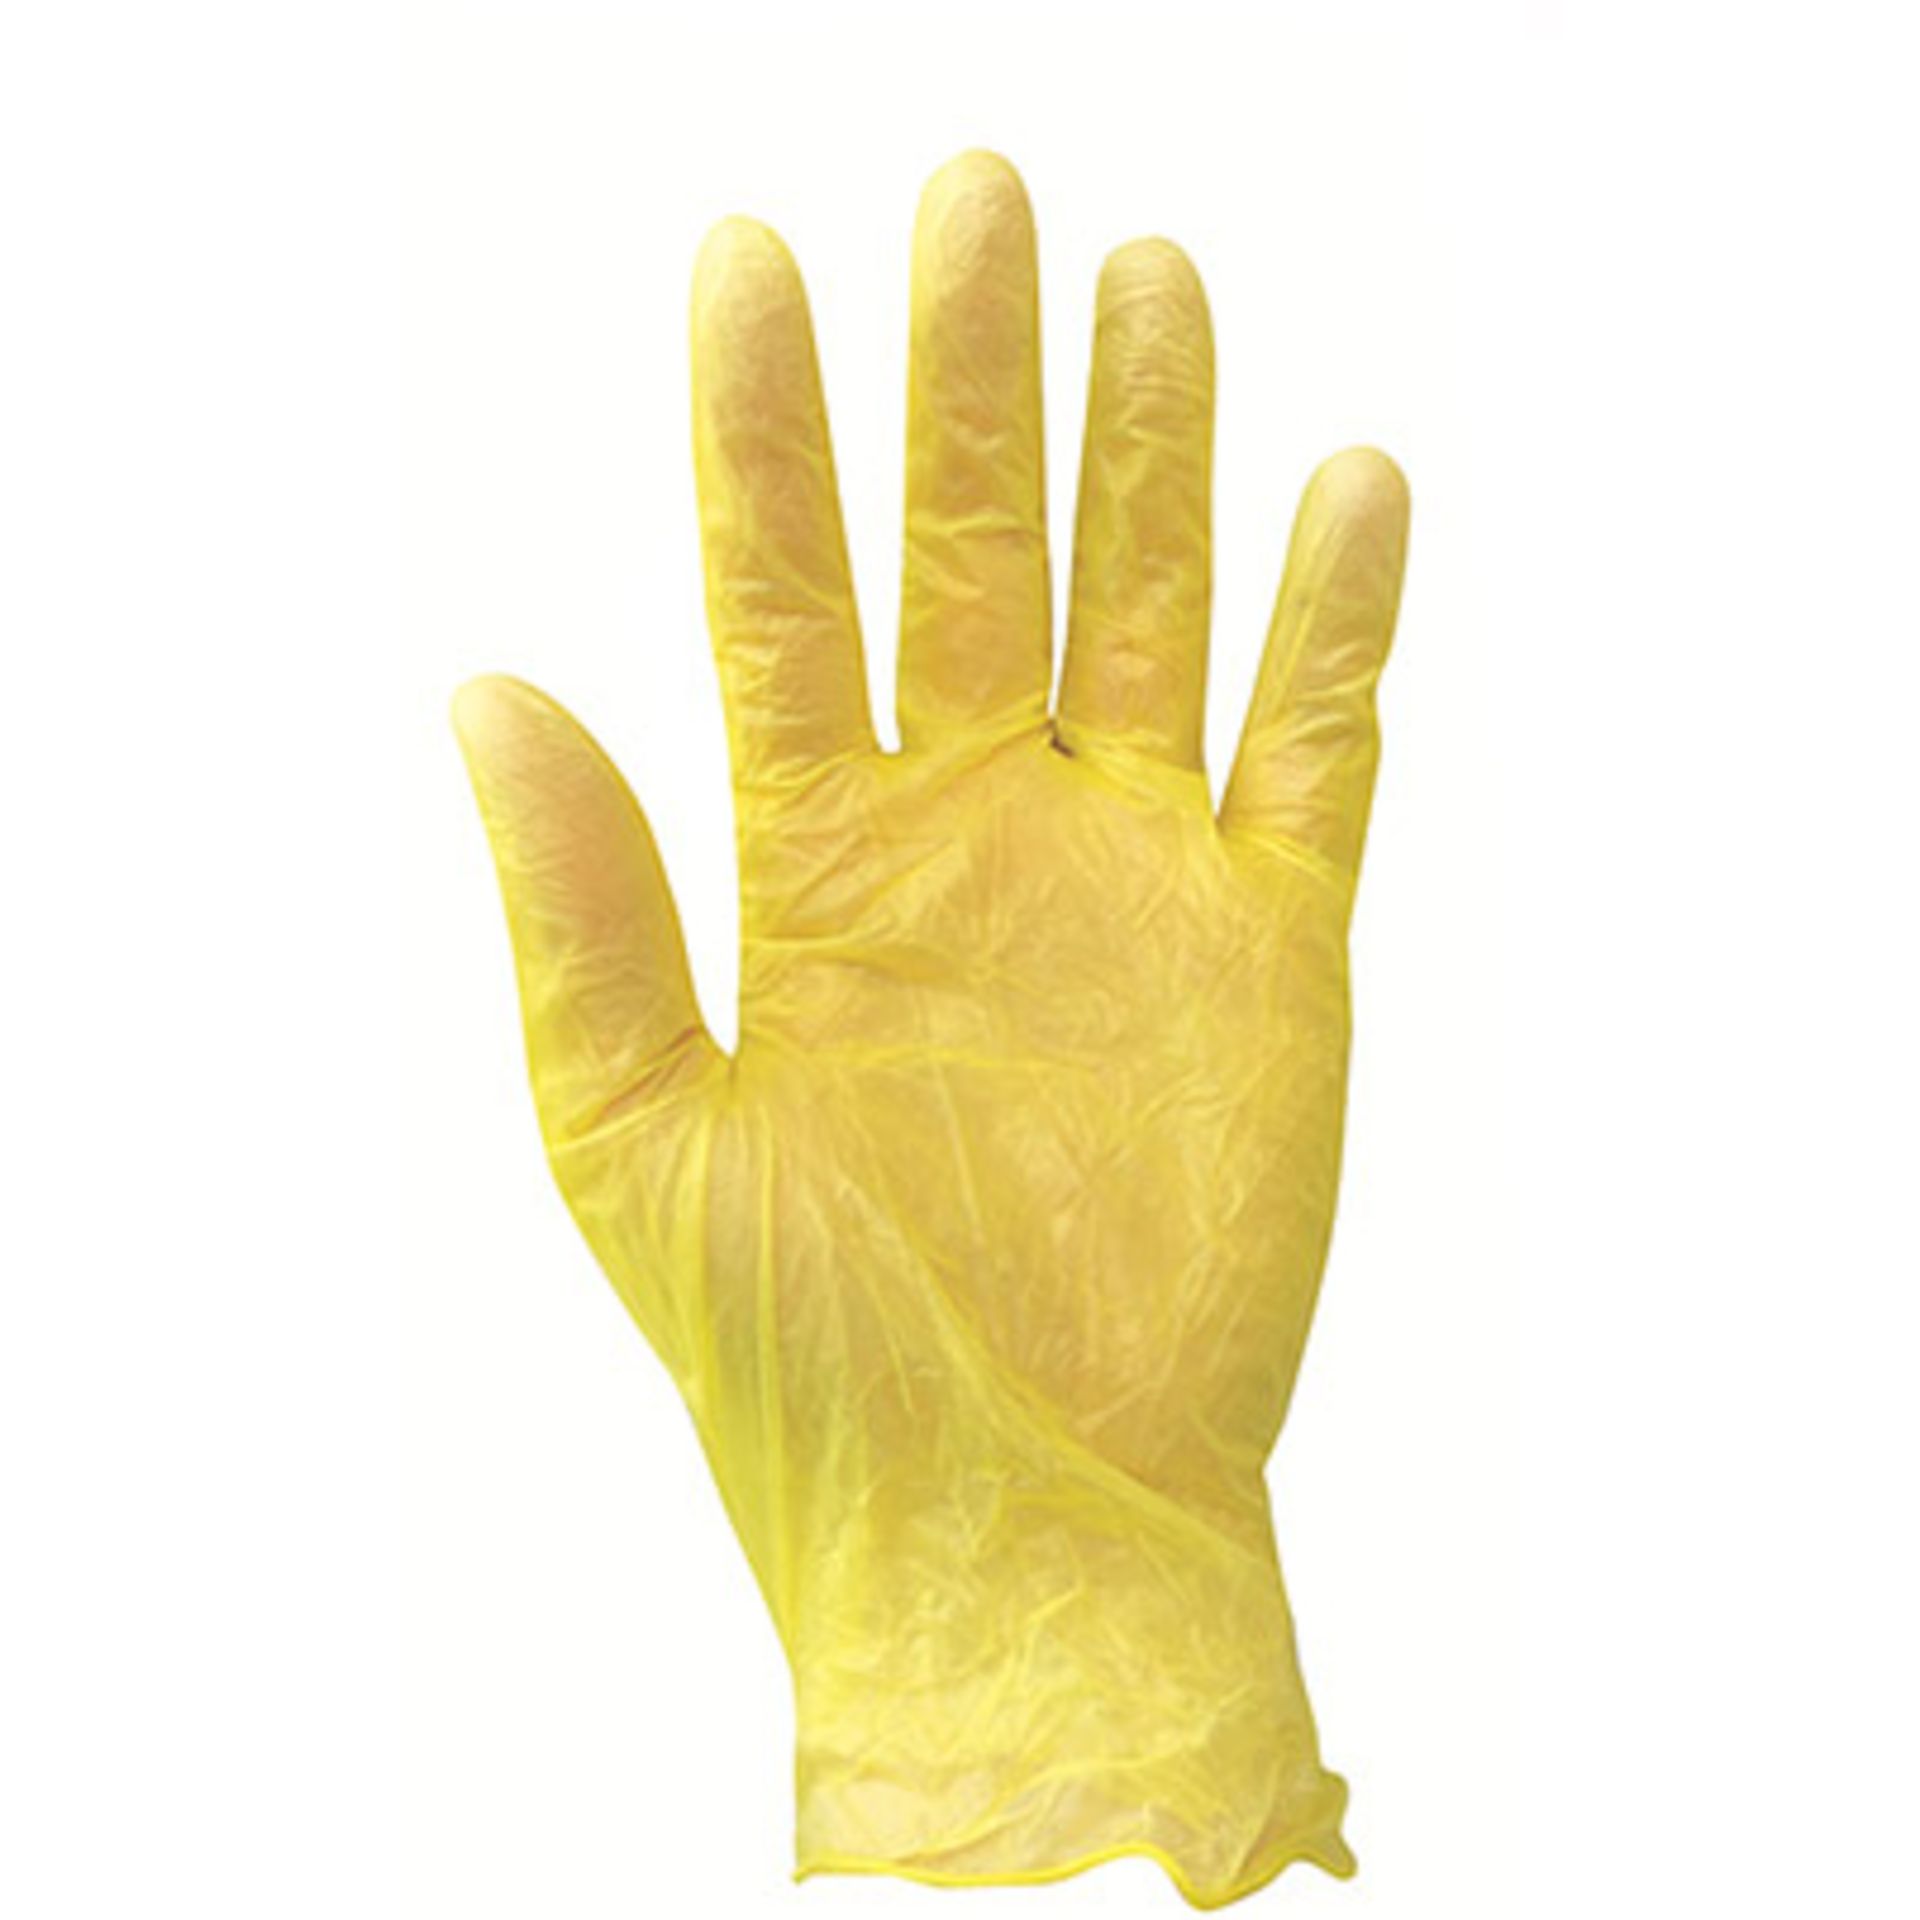 100 BOXES OF 100 YELLOW VINYL DISPOSABLE GLOVES - Image 2 of 2